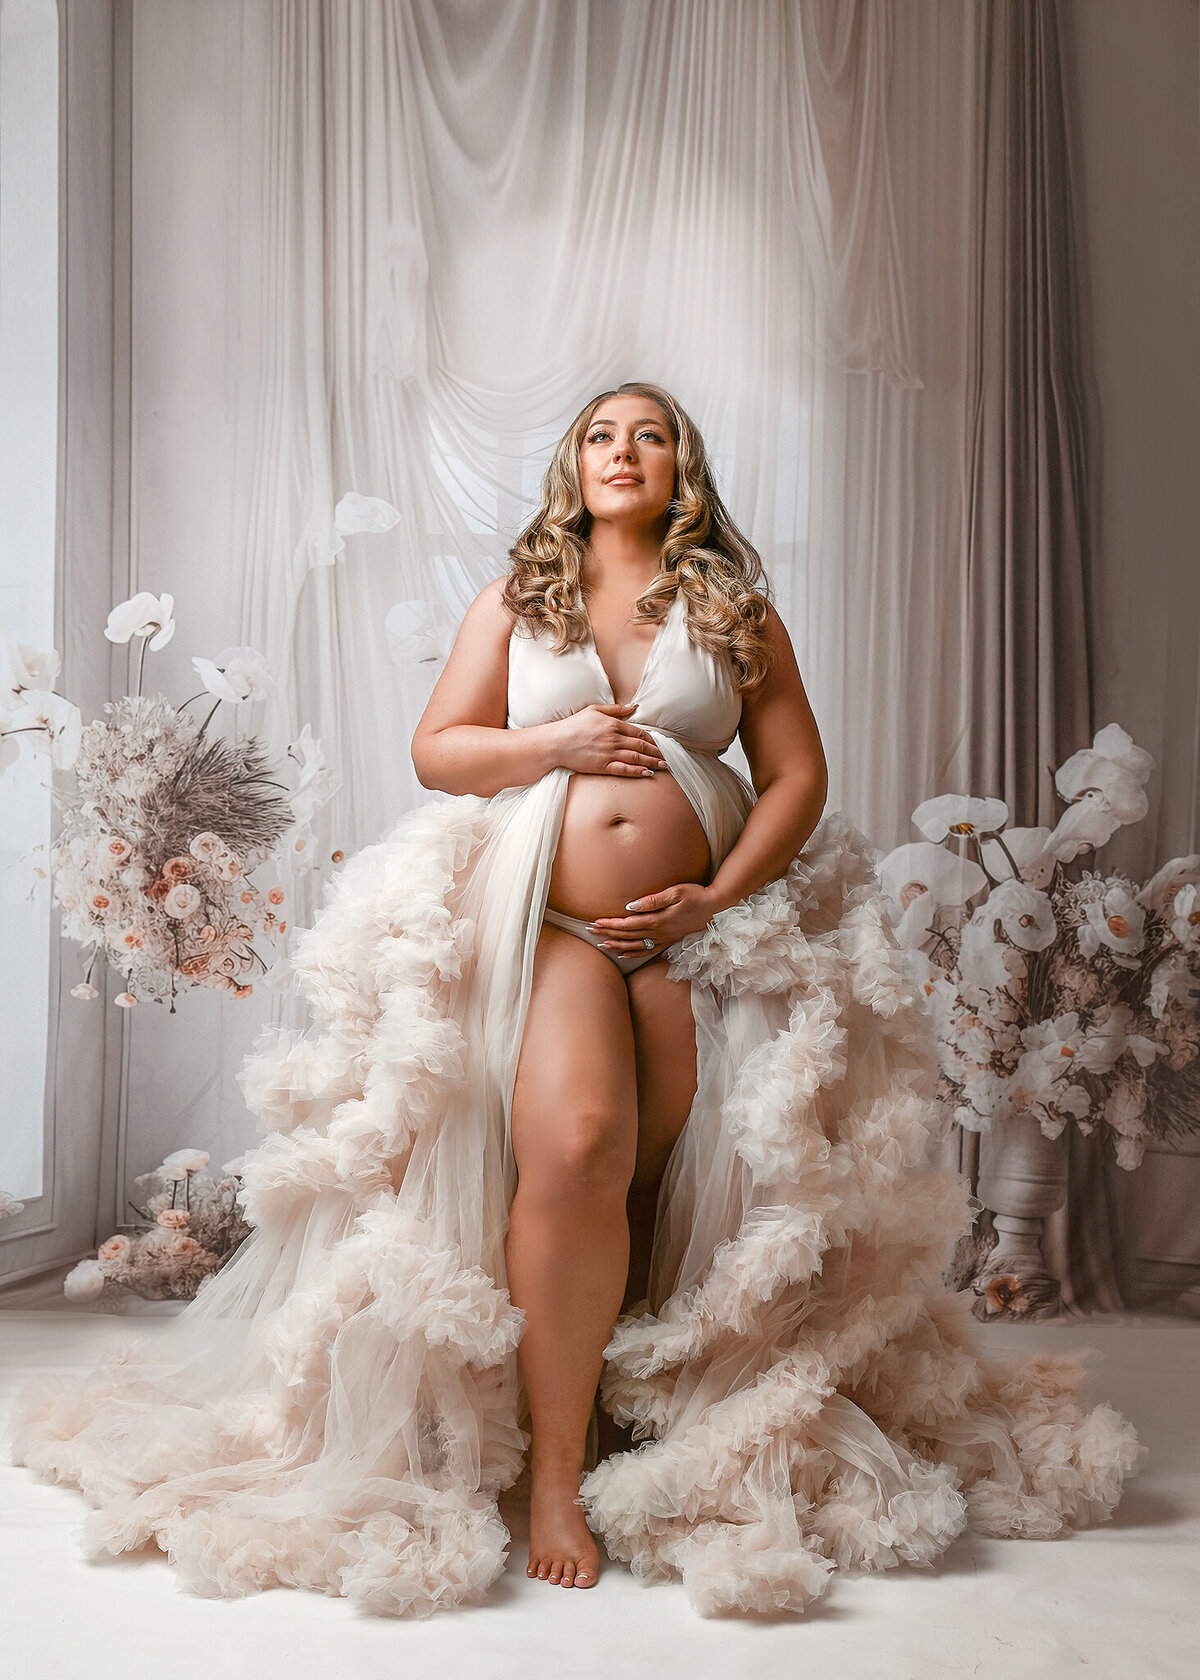 Exvpecting woman with long blond curled hair, wearing cream tulle gown, standing against a tan/cream windon and curtain background with floral arrangements in Scottsdale Maternity studio